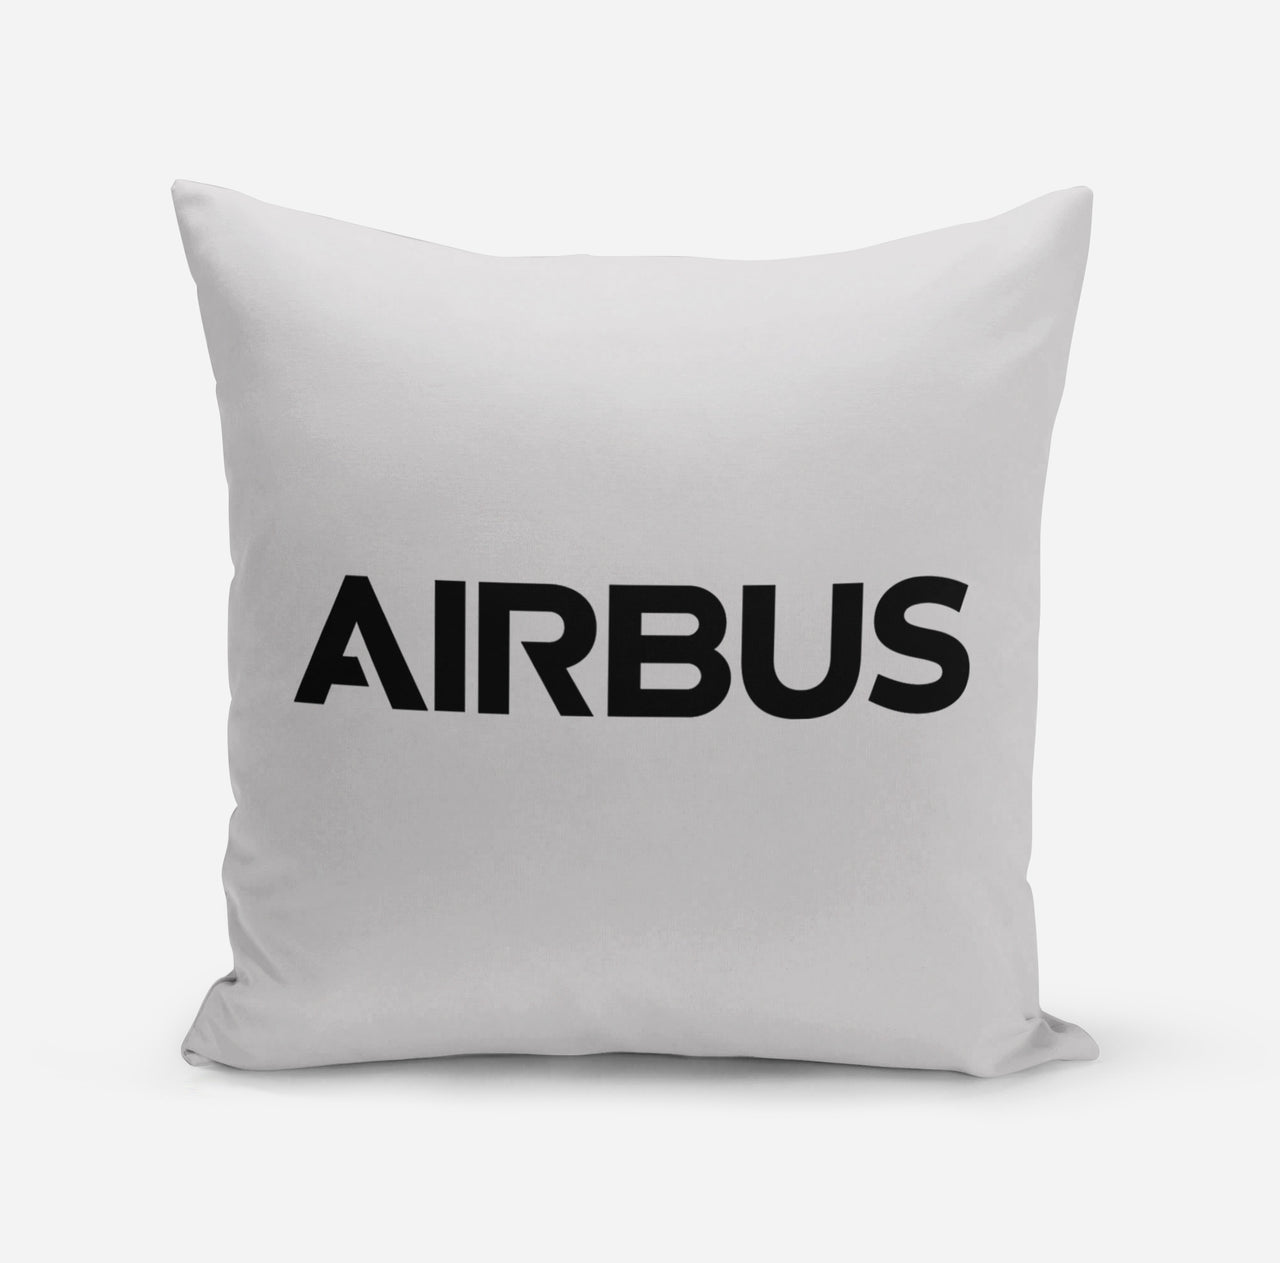 Airbus & Text Designed Pillows